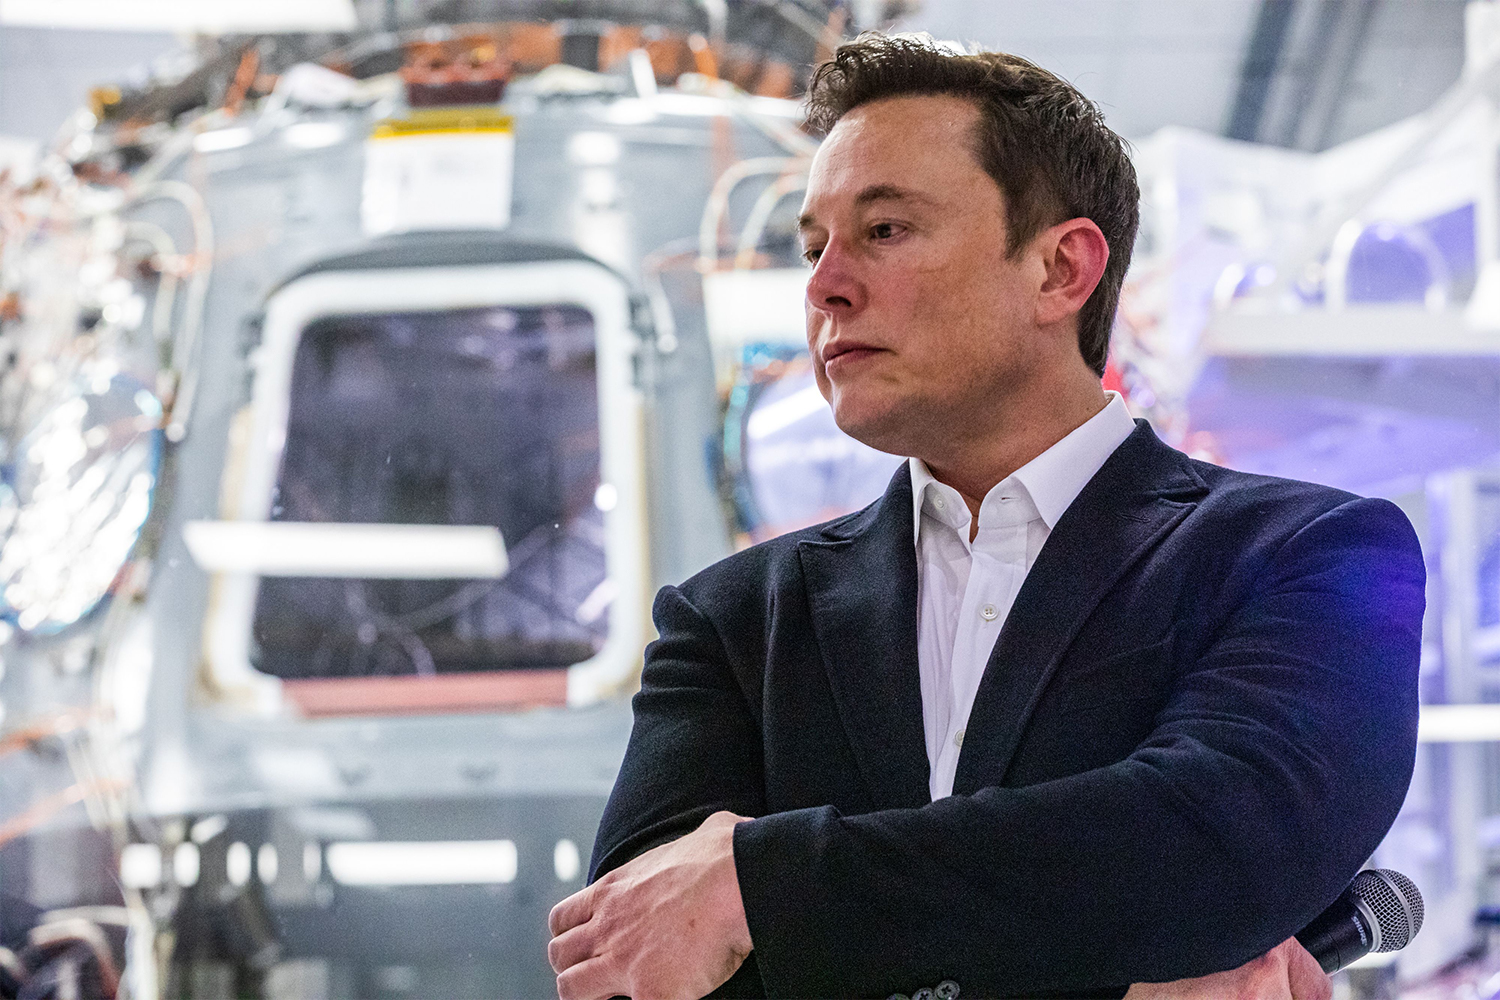 Elon Musk at a press conference at SpaceX headquarters in Hawthorne, California in 2019.